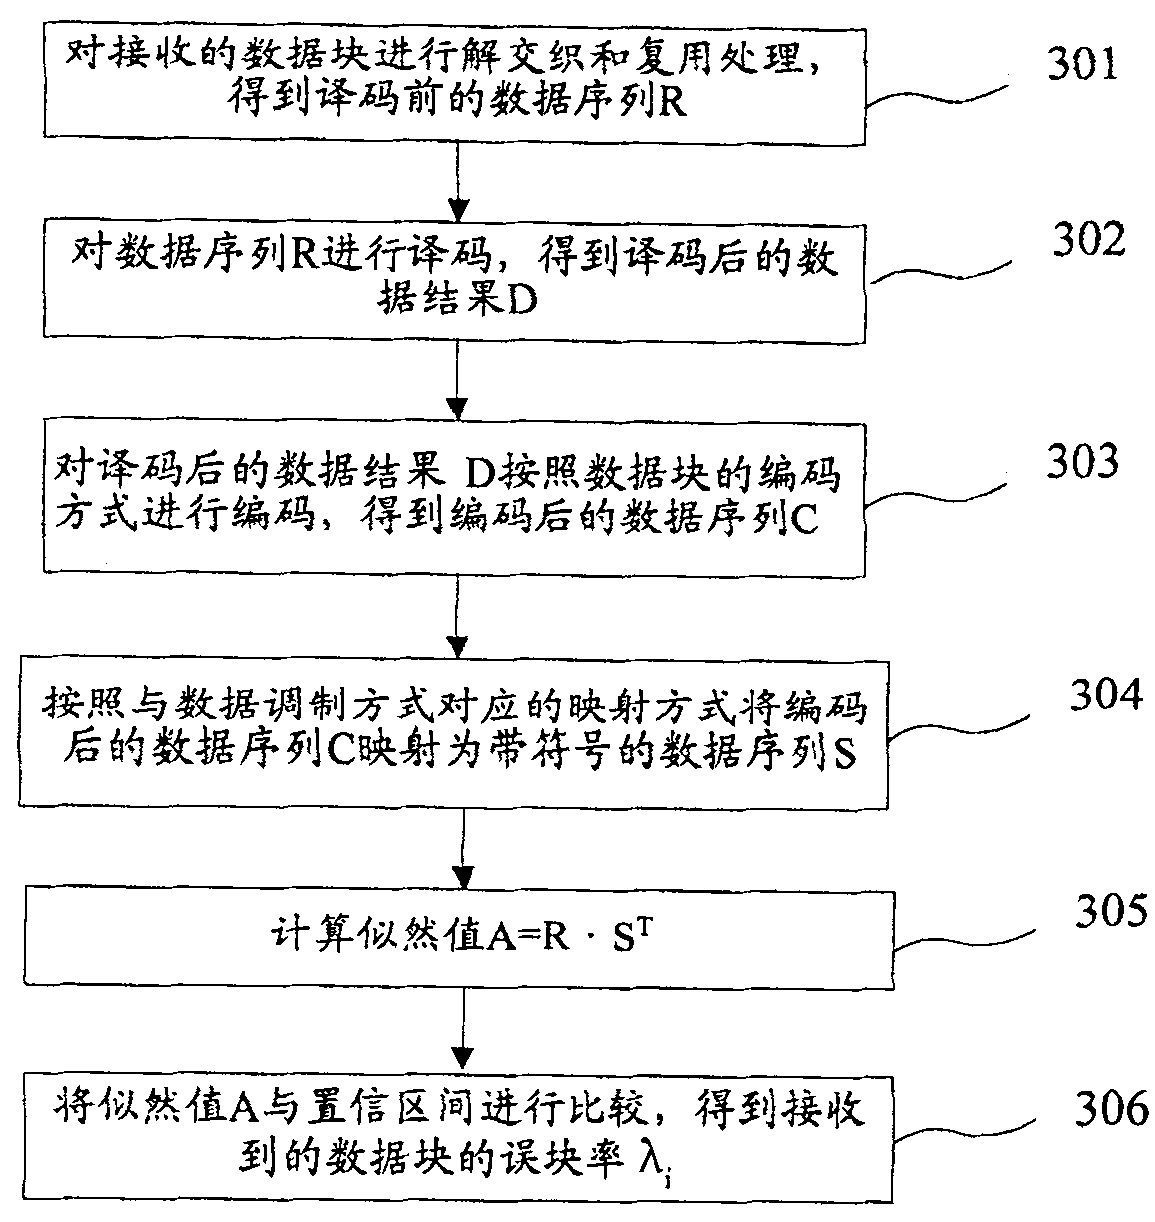 Method and apparatus for obtaining the number of decoding error block from check-free data block